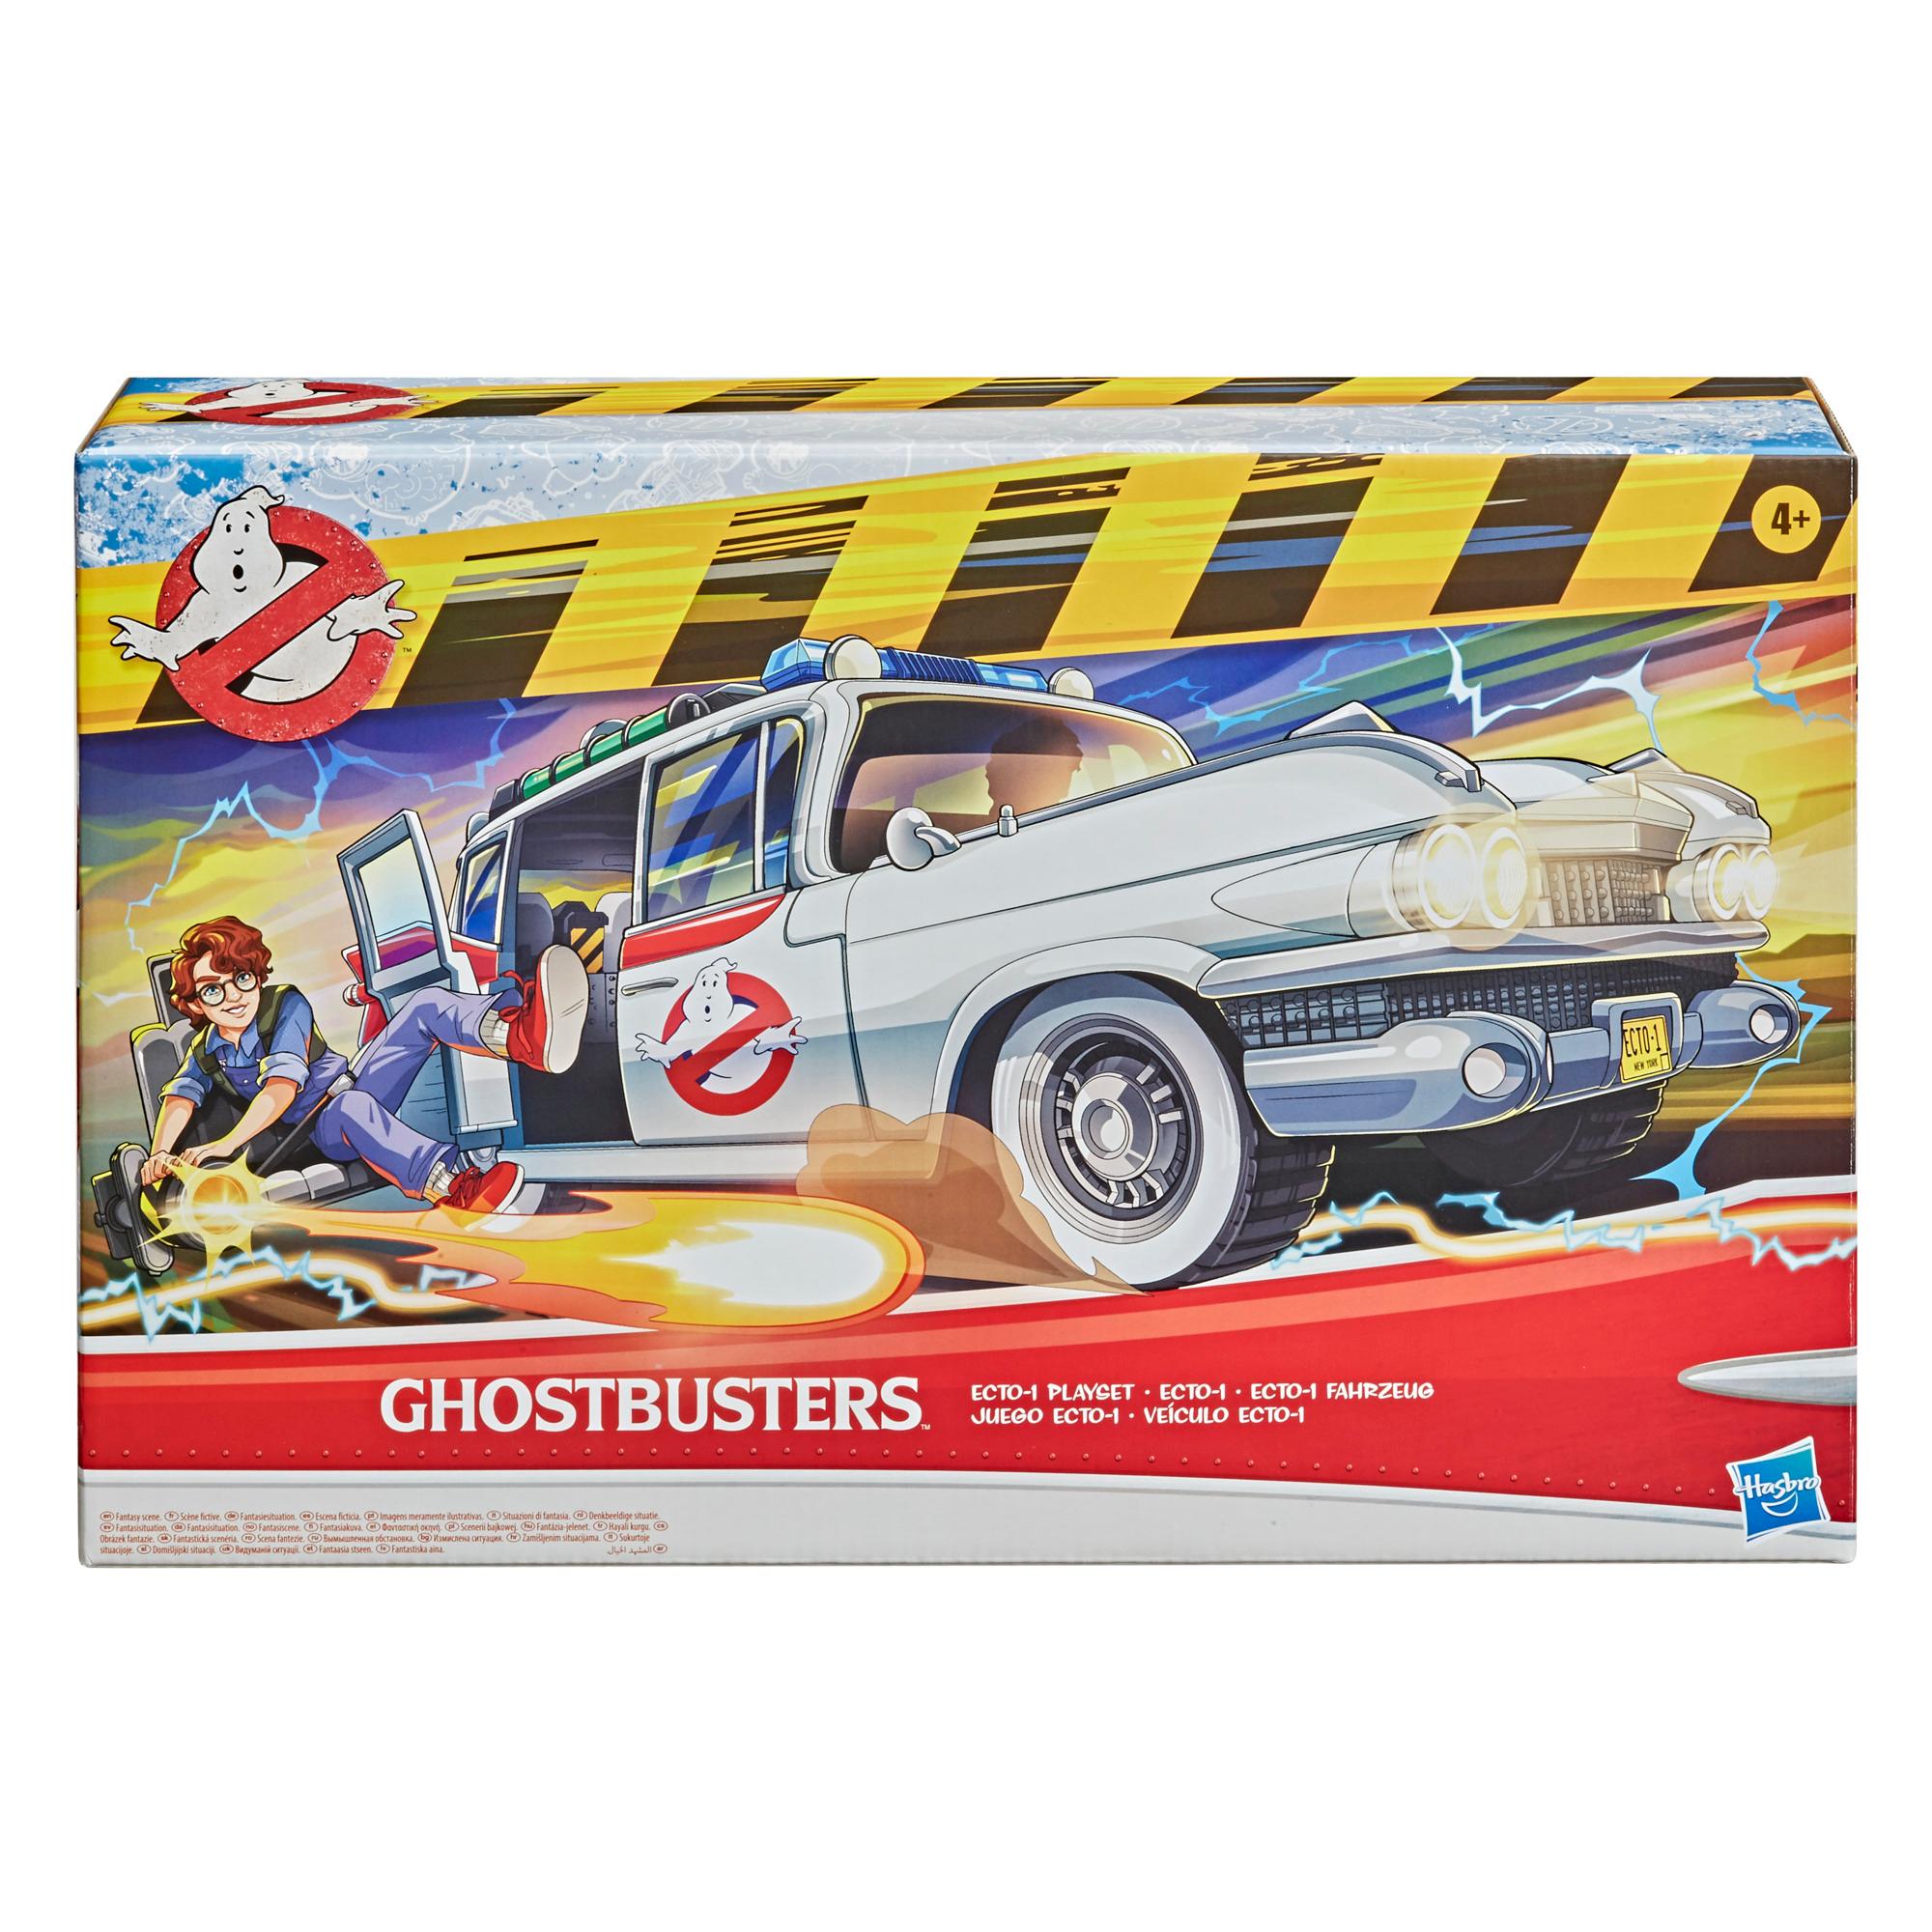  Ghostbusters Plasma Series Ecto-1 Toy 15-cm-Scale Afterlife  Collectible Vehicle, Children Aged 14 and Up E95575L0 : Toys & Games